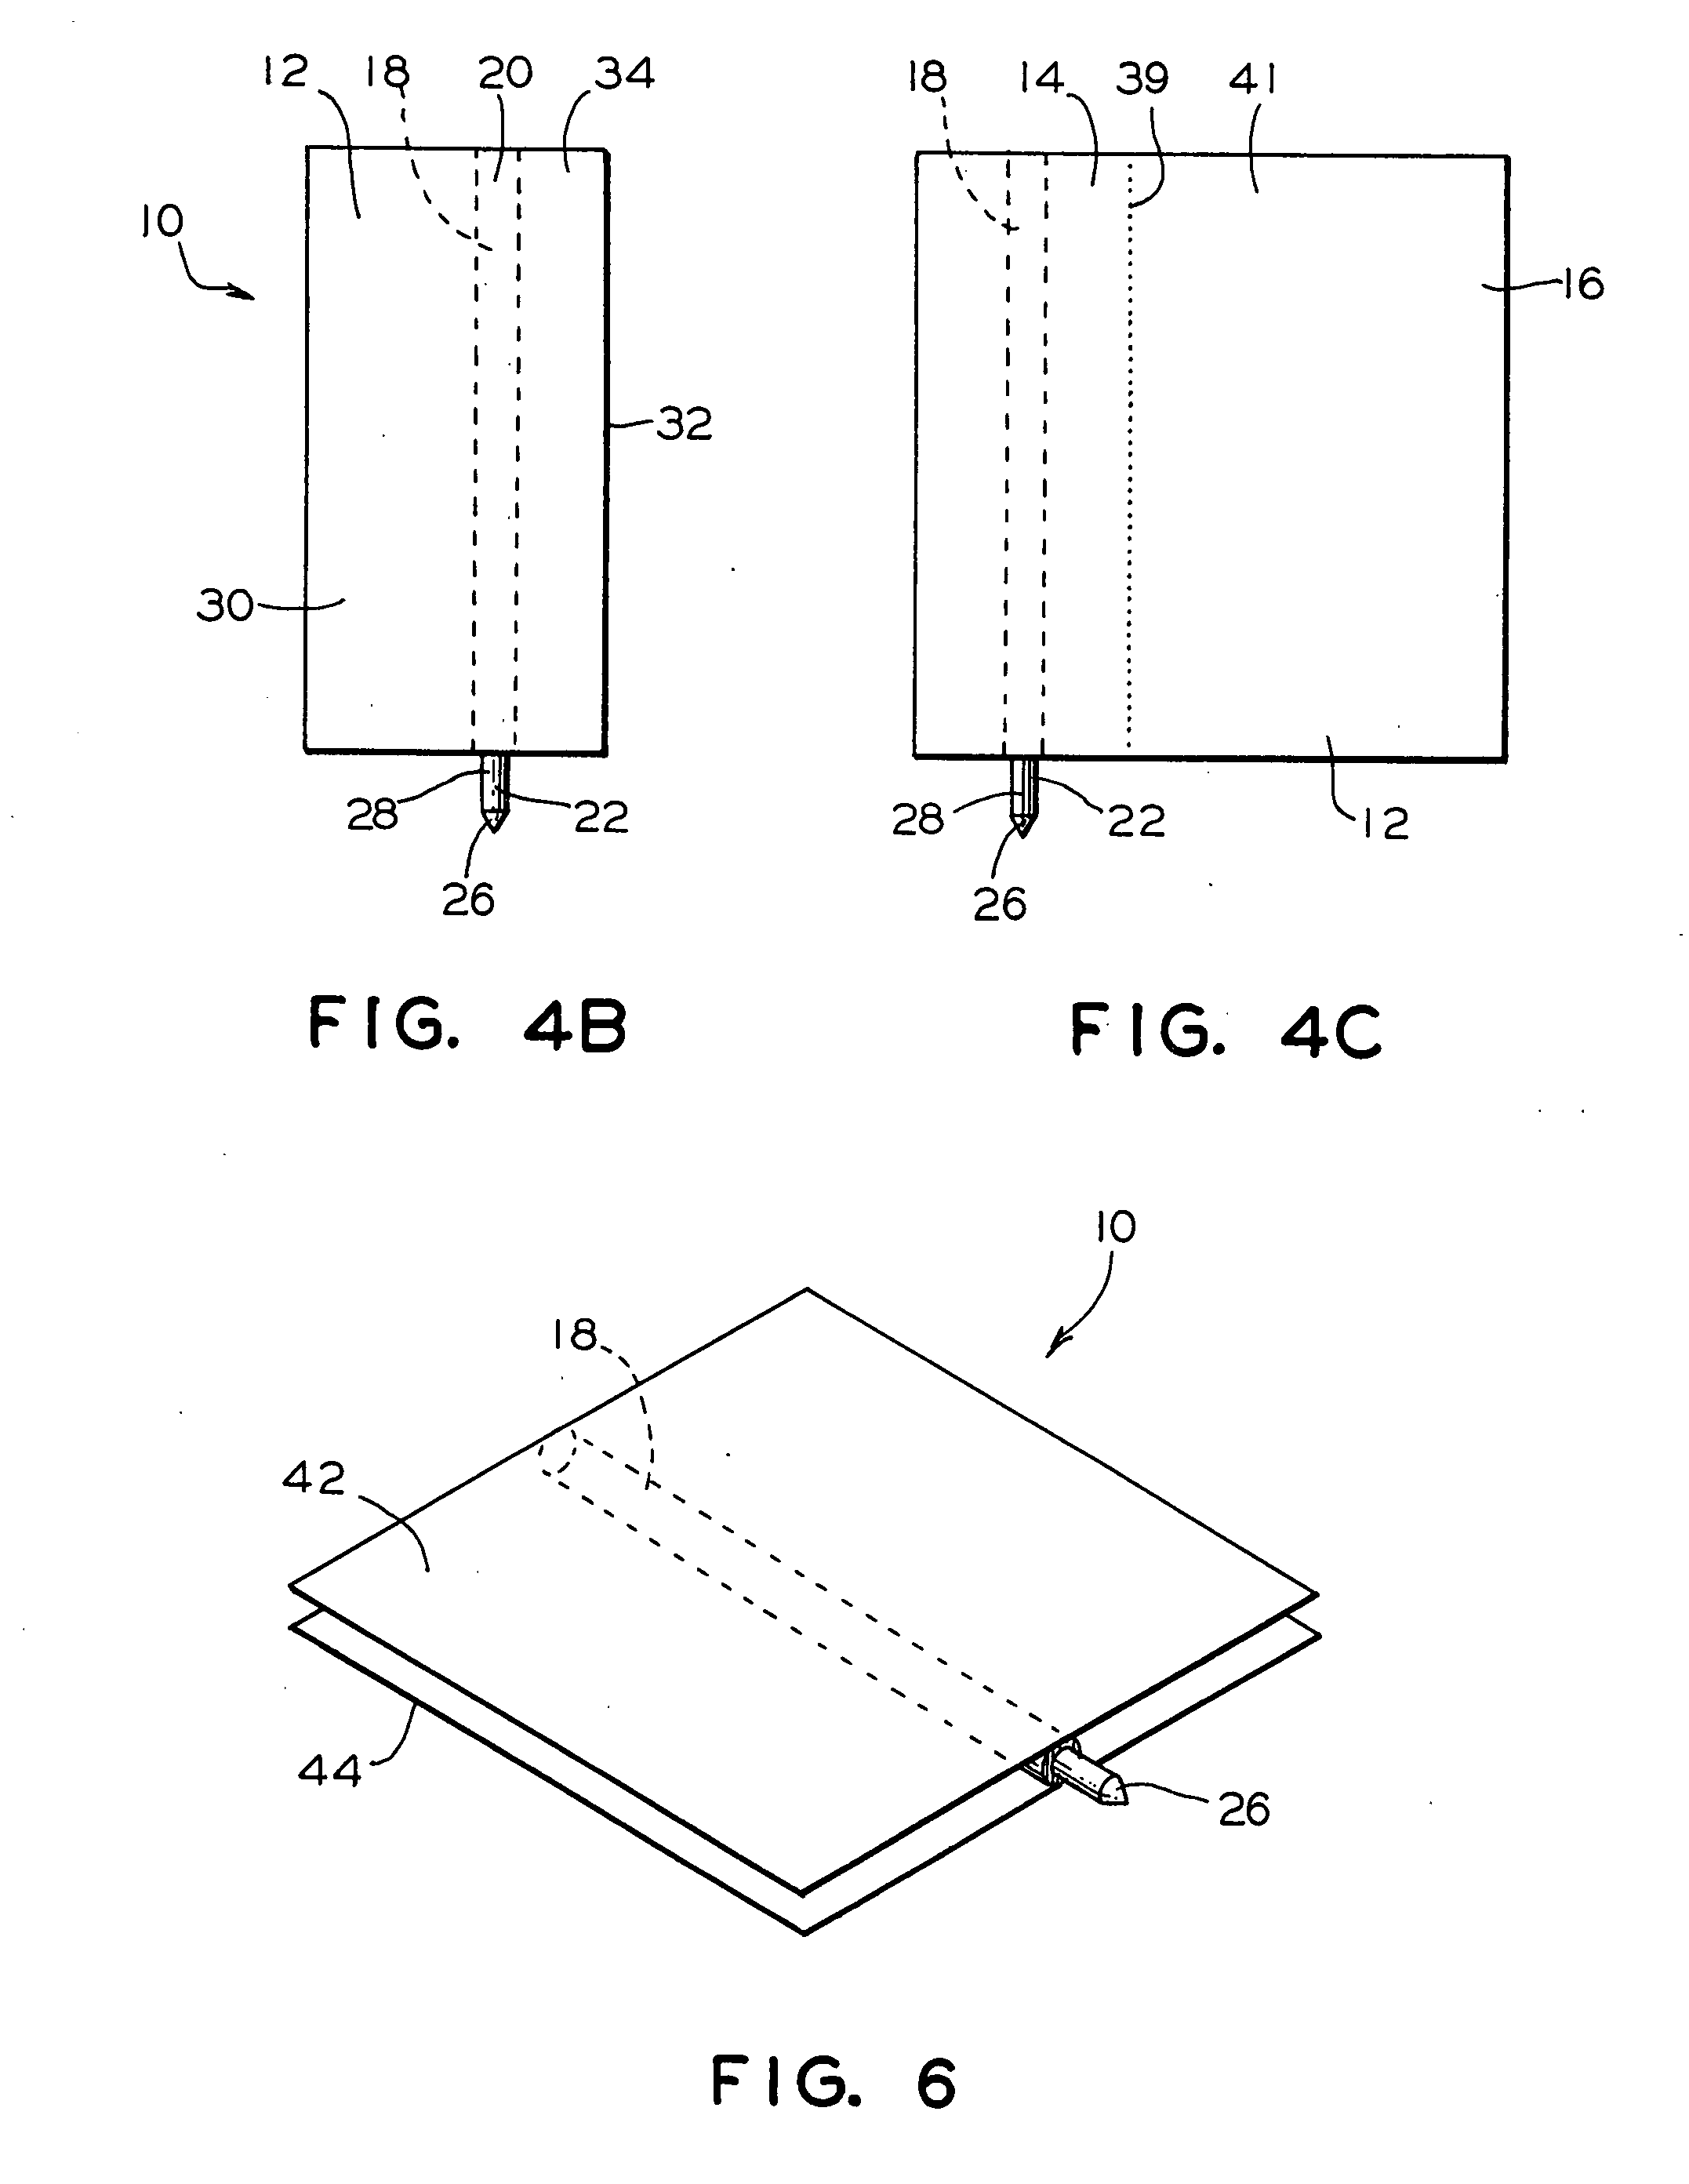 Sanitary disposable writing instrument, method of making, and dispenser therefore